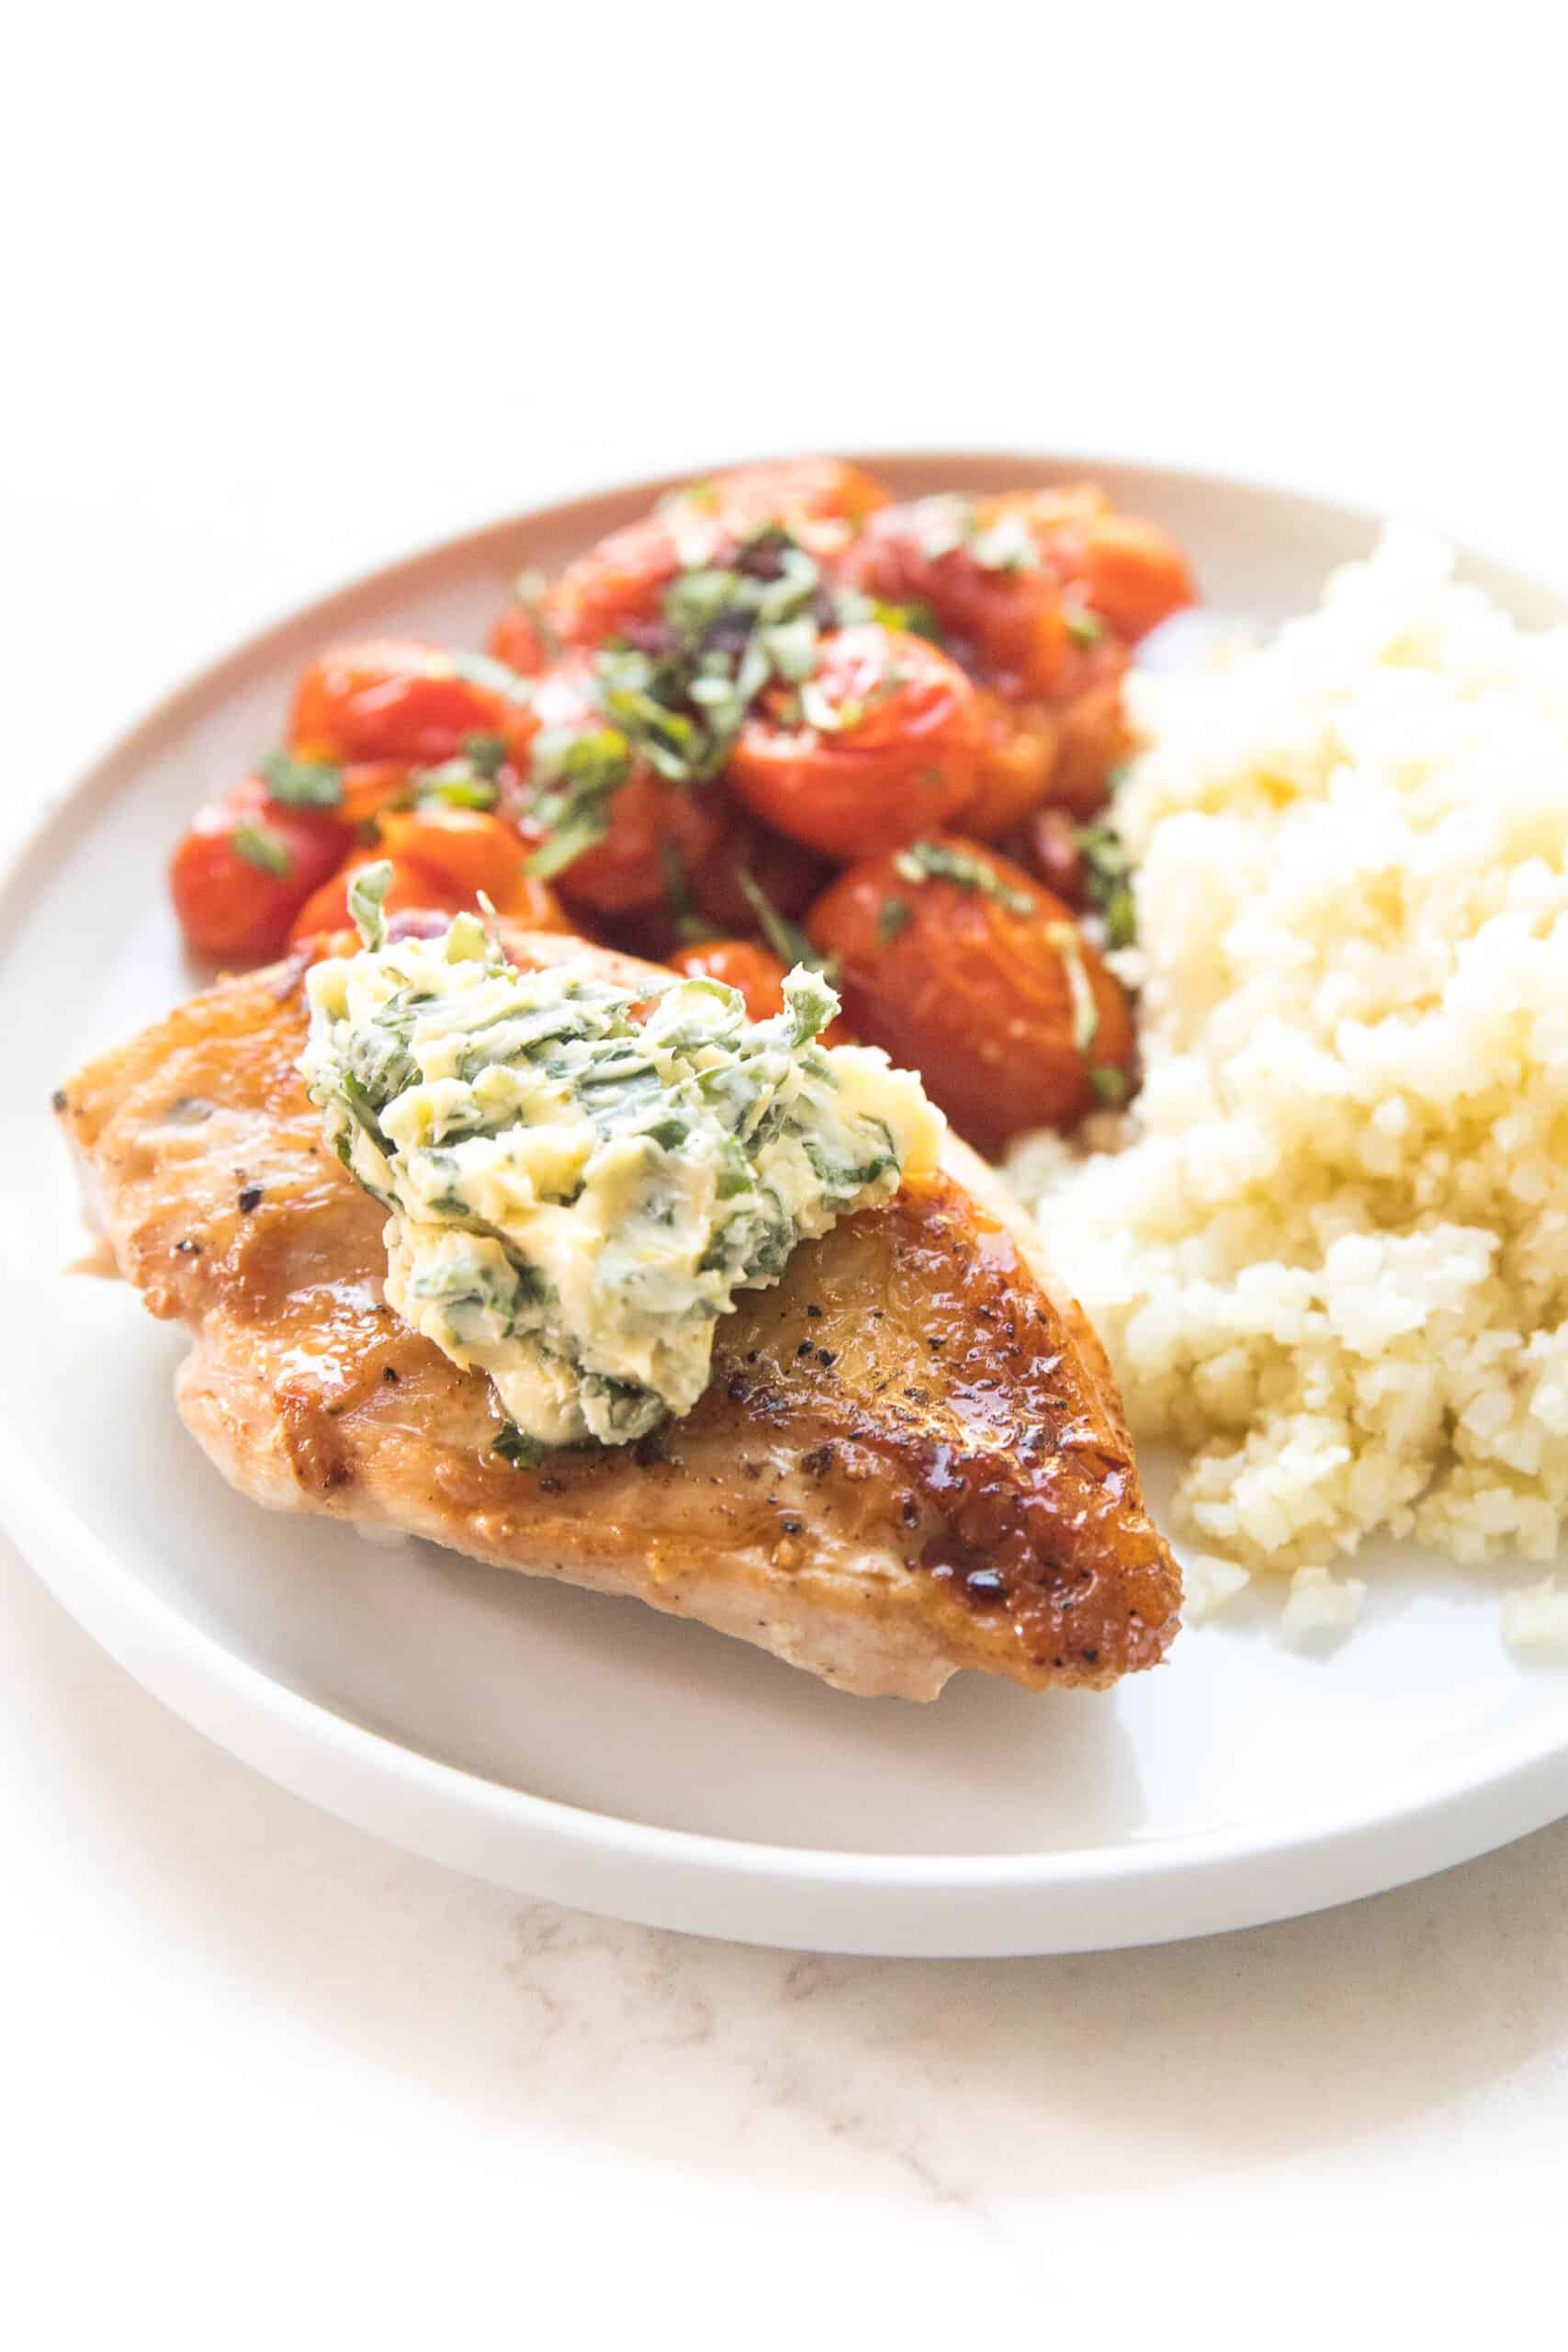 chicken with basil butter, blistered tomatoes and cauliflower rice on a white plate